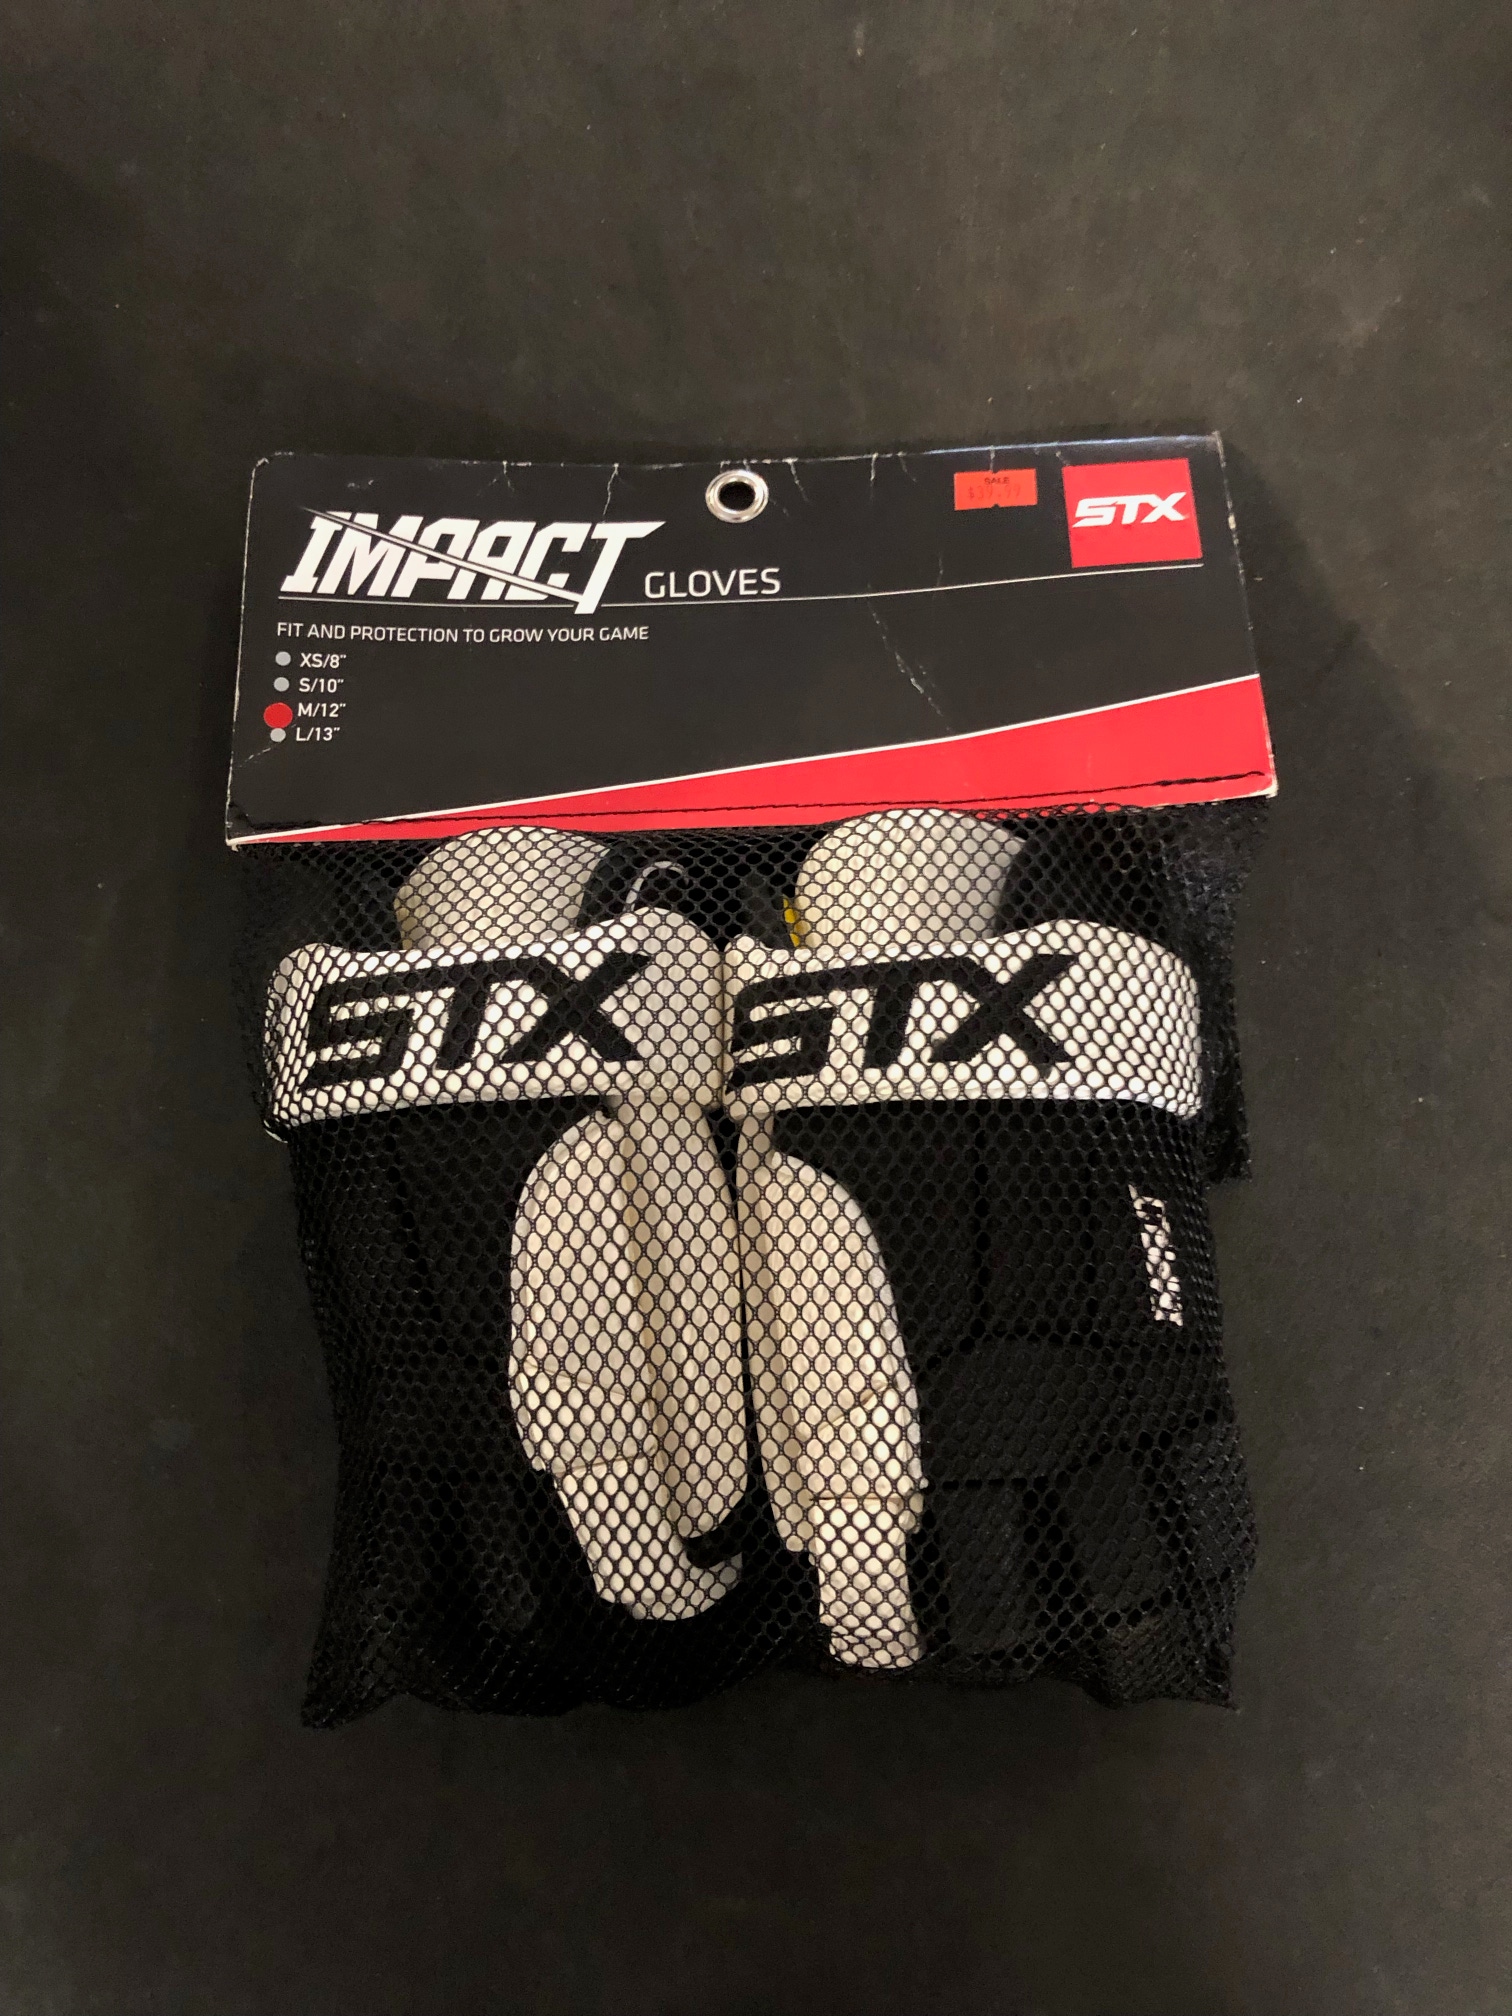 New Player's STX Impact Lacrosse Gloves 12"